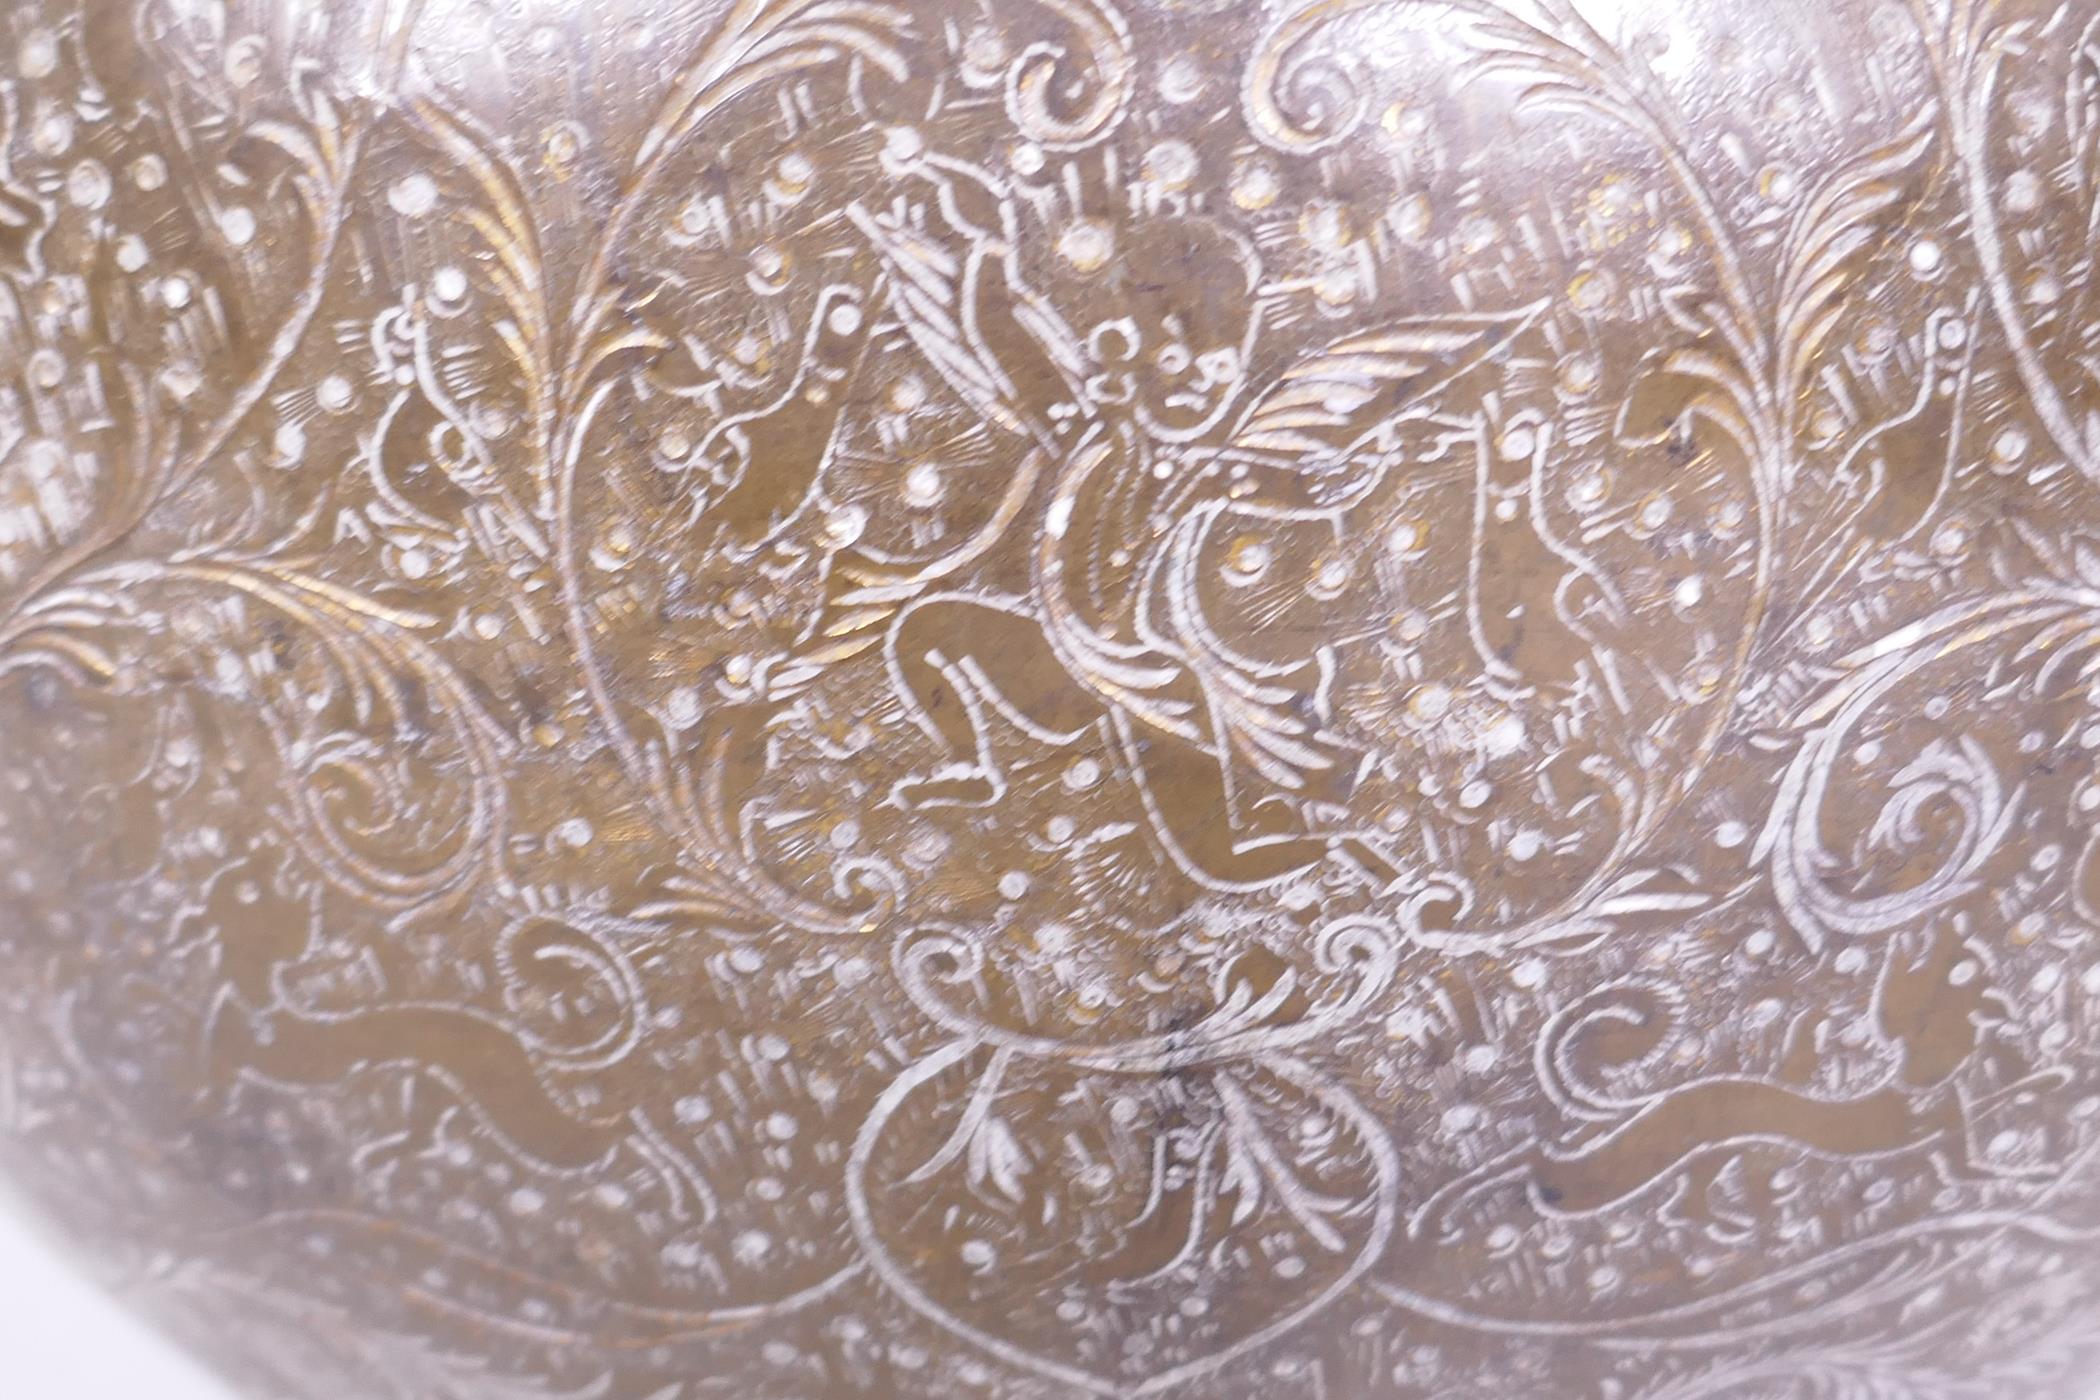 An antique Indian brass vase with engraved decoration of scrolling foliate designs and figures - Image 3 of 7